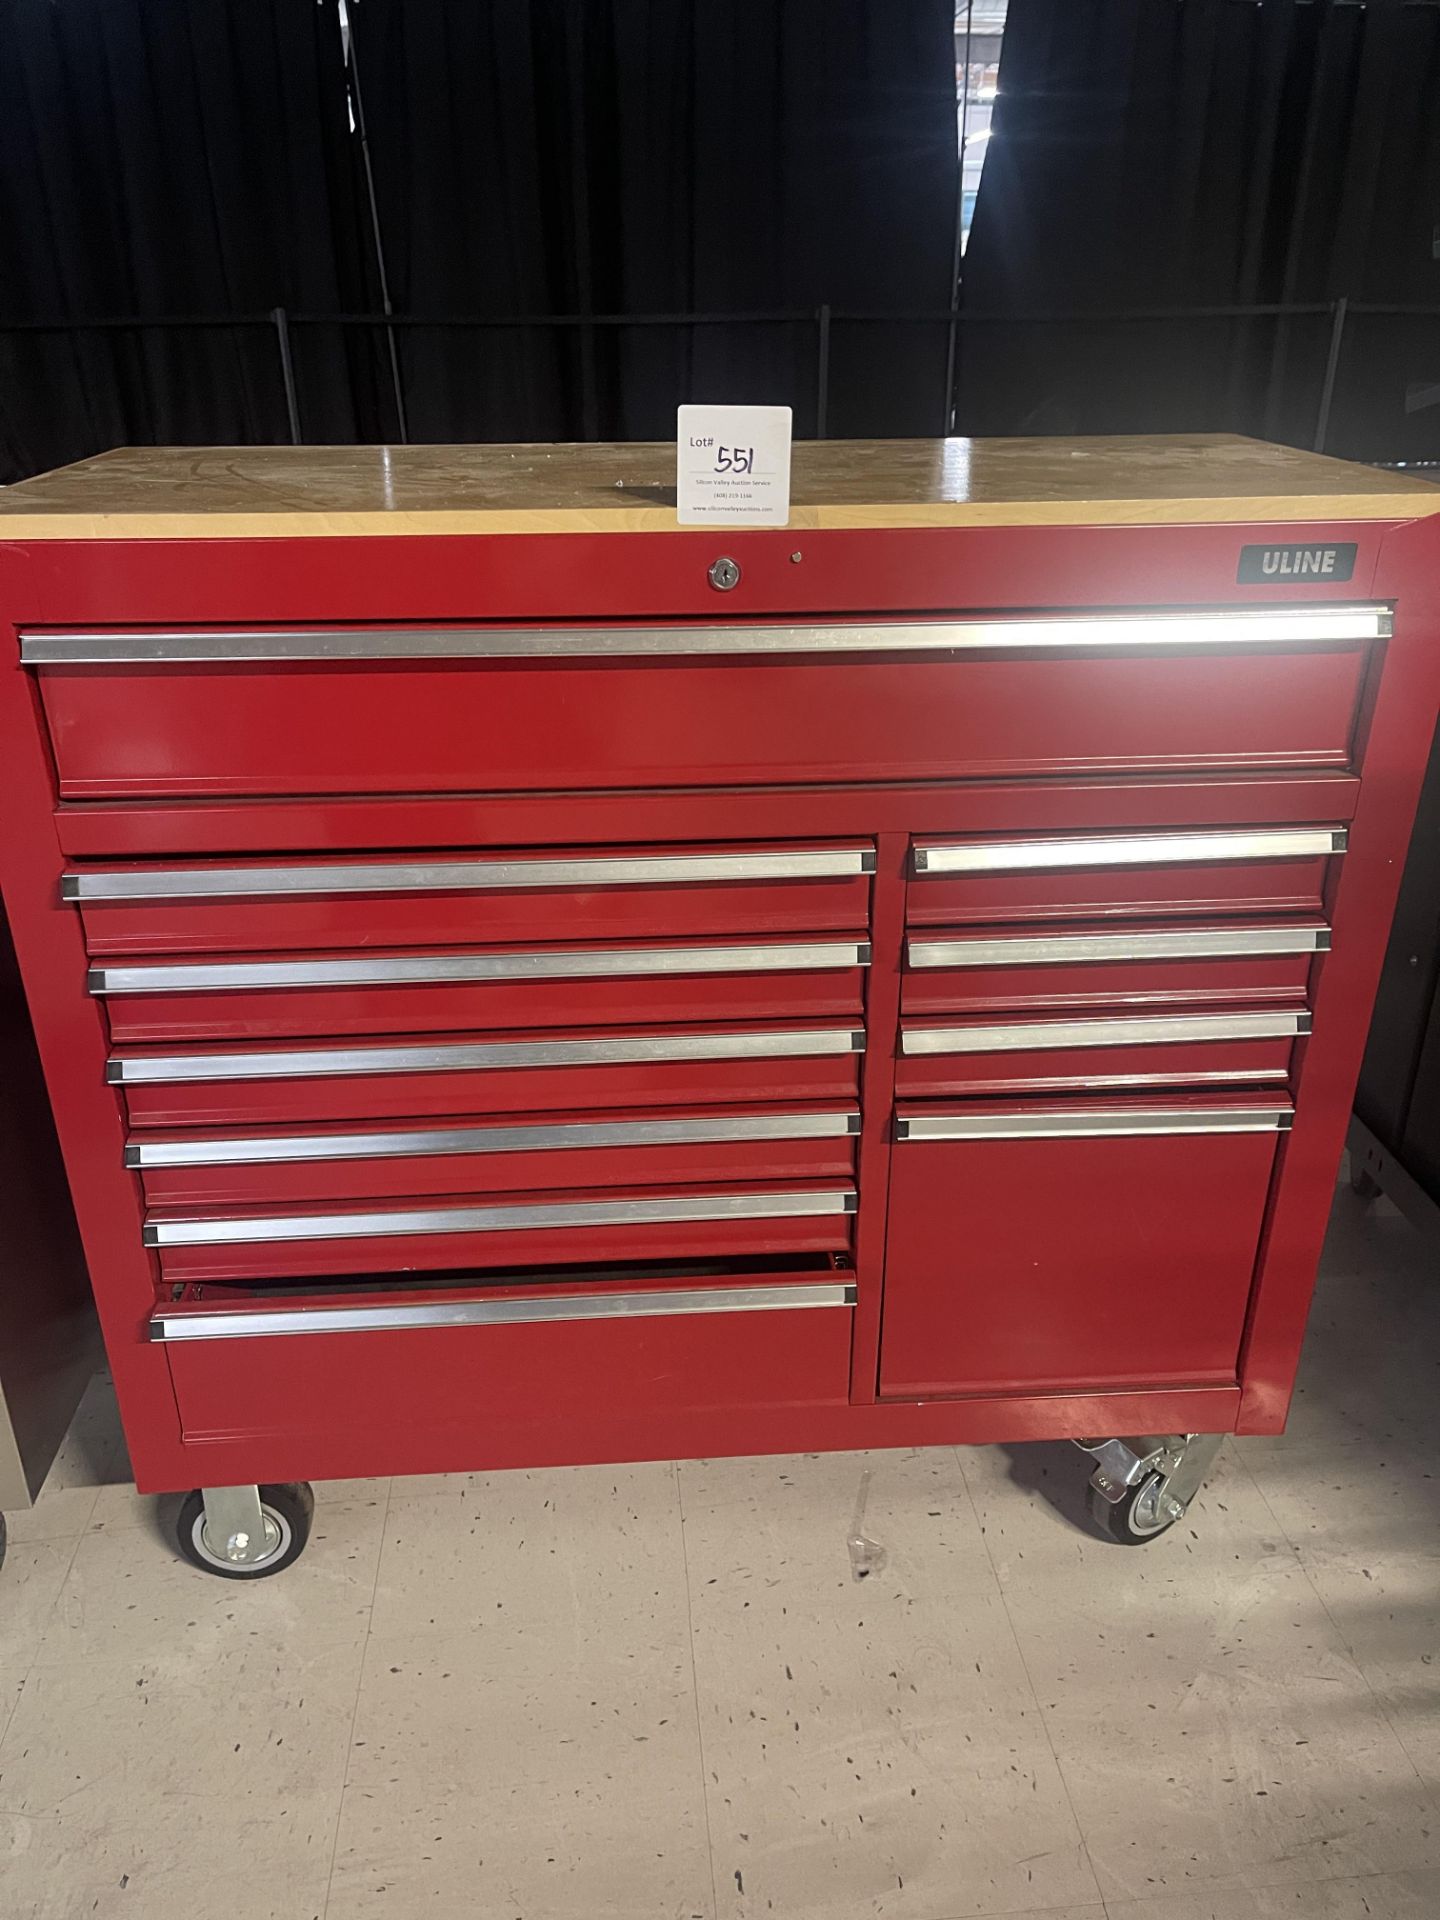 Uline red metal tool box on wheels with 11 drawers 42" wide x 18" deep x 40" high